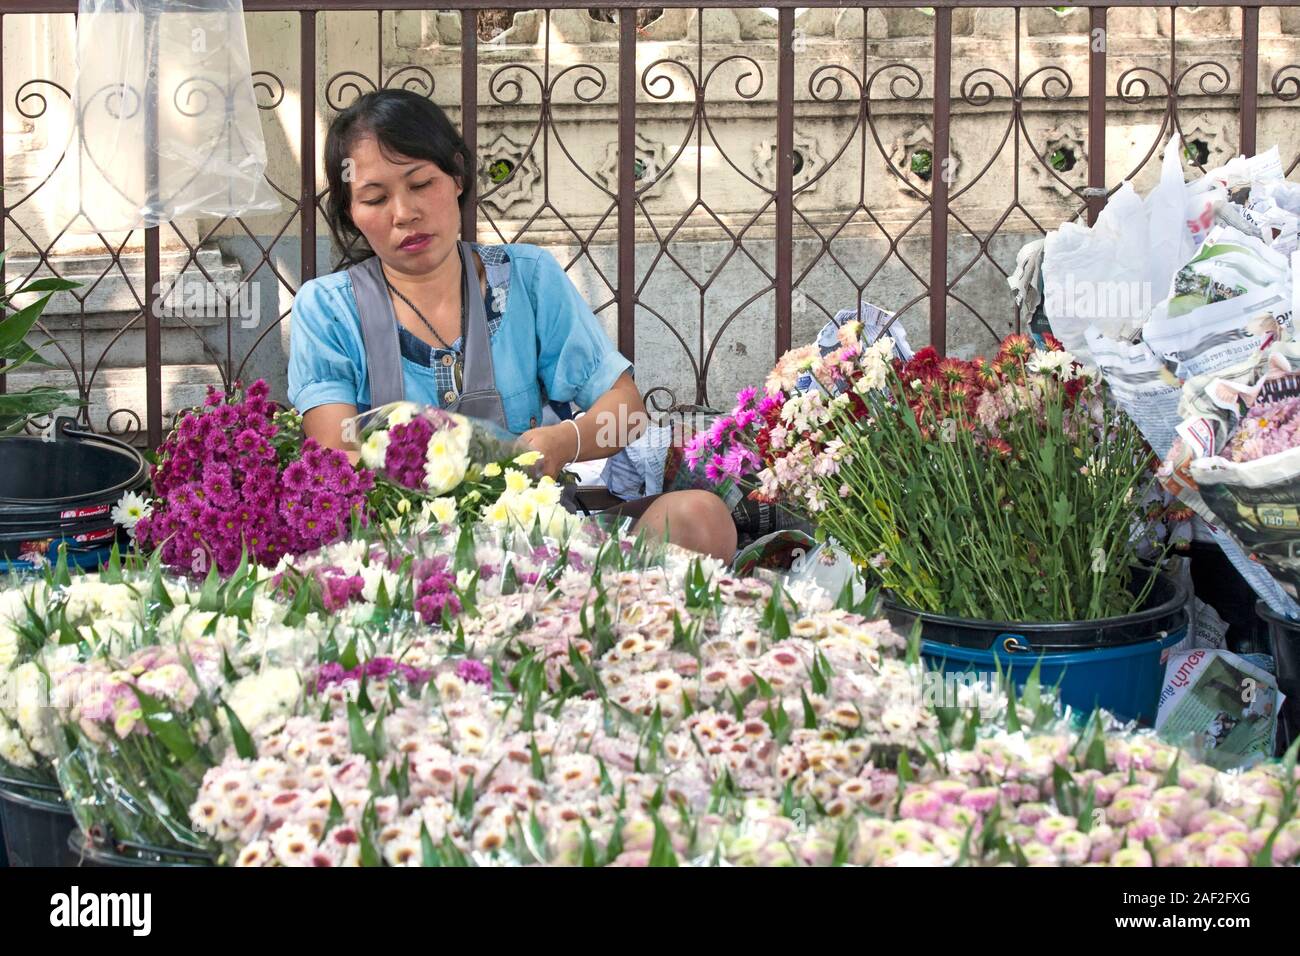 BANGKOK, THAILAND-OCTOBER 26TH 2013: A woman prepares flowers for sale at Bangkok's flower market (Pak Khlong Talat). The market is the biggest wholes Stock Photo